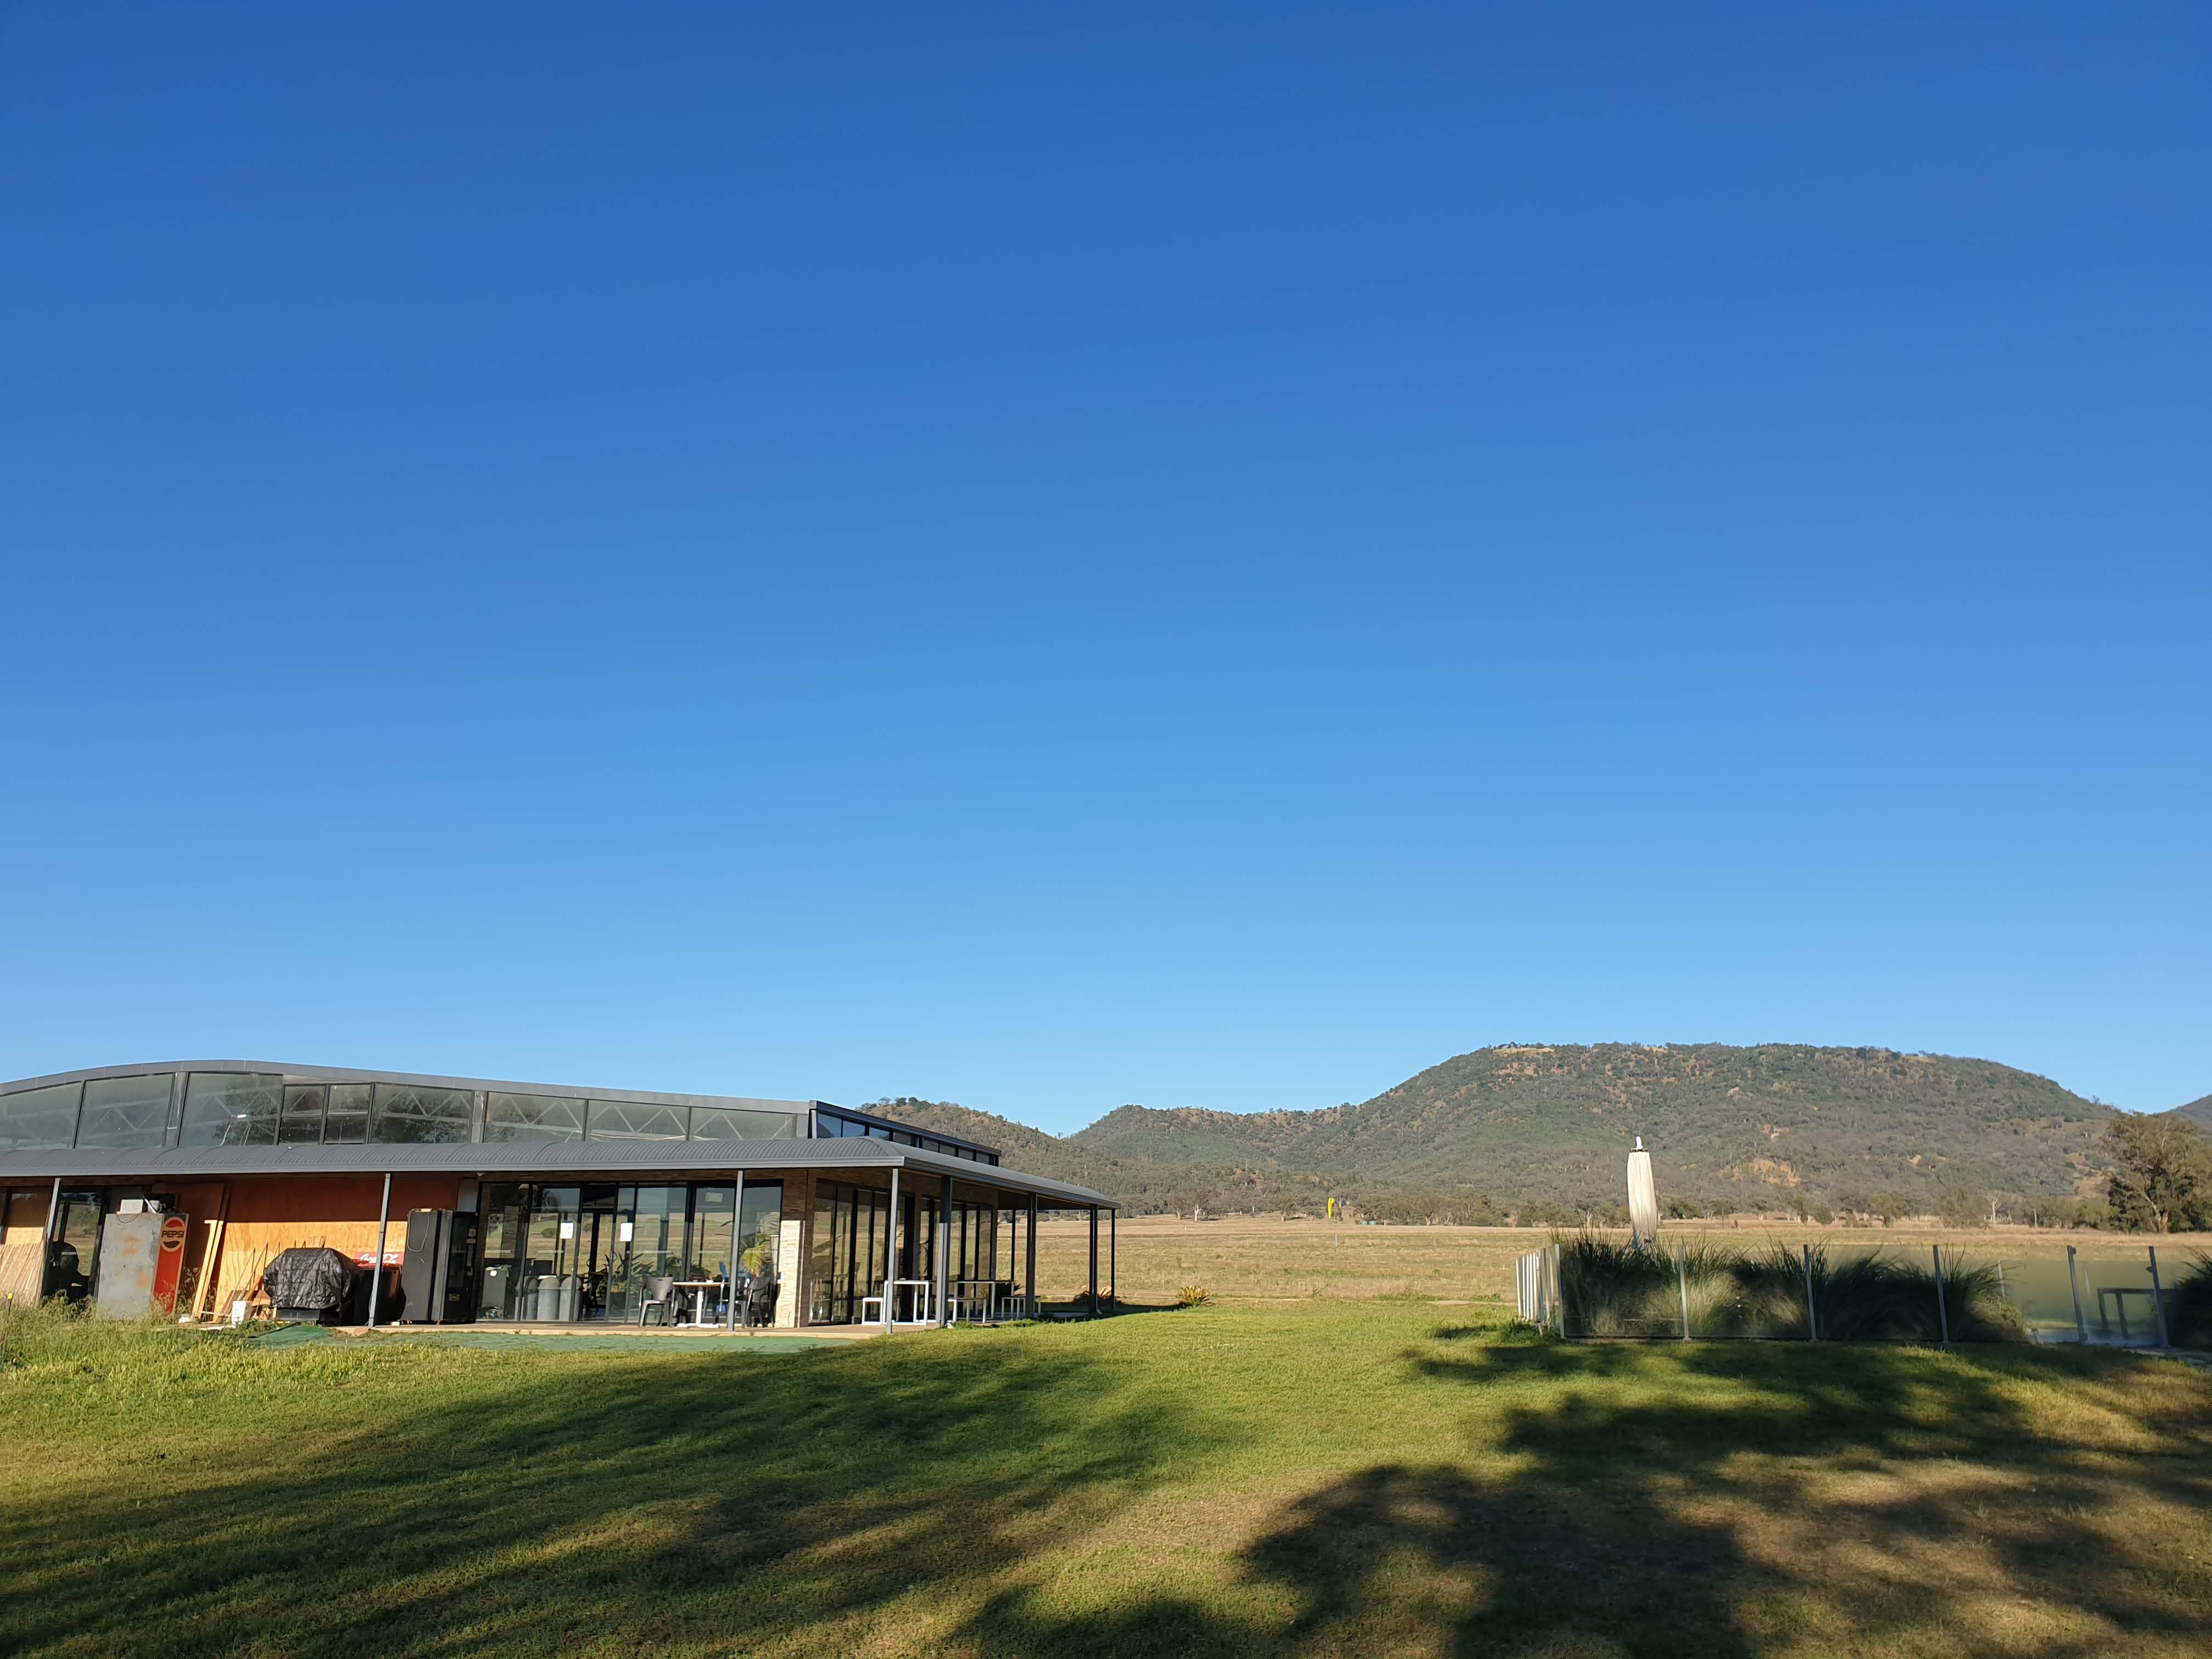 The headquarters building with the paddock and Mt Borah in the background